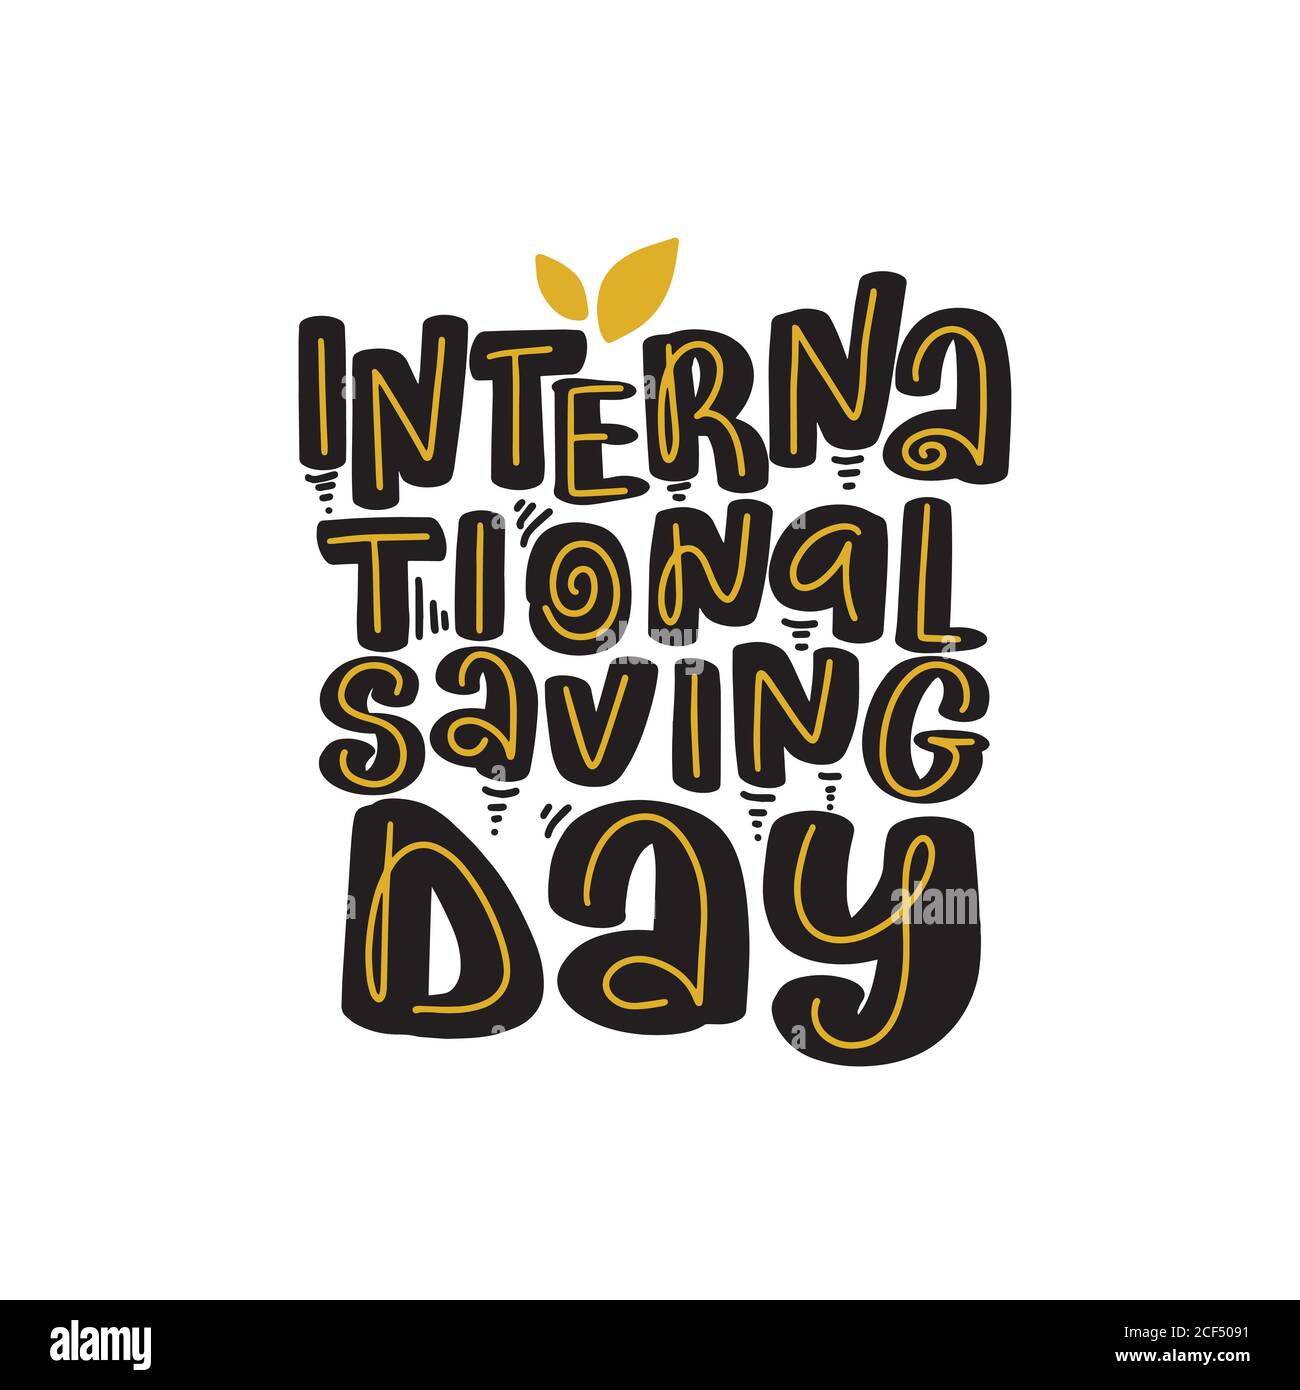 International Saving Day Hand drawn lettering for holiday Stock Vector